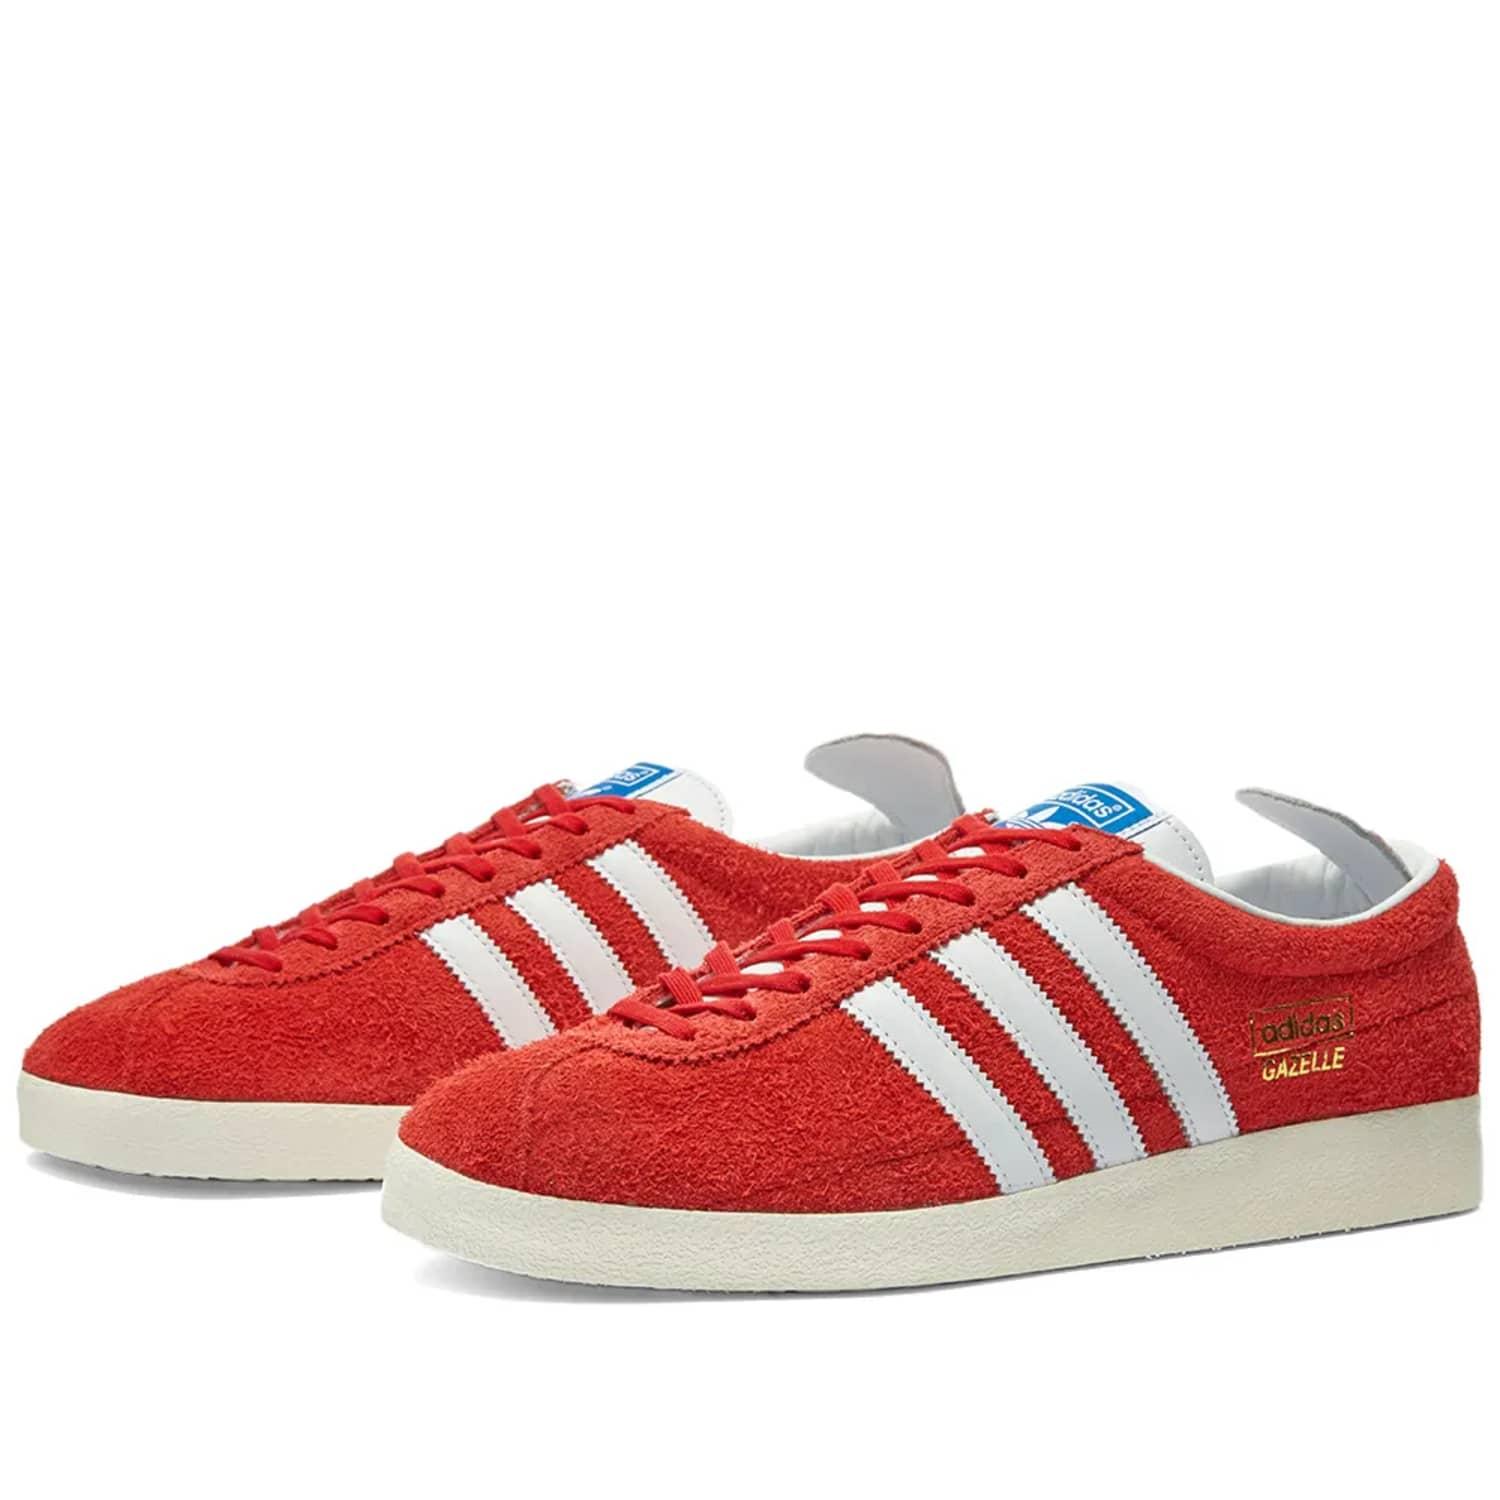 adidas Gazelle Vintage Shoes Scarlet Cloud White Gold Metallic in Red | Lyst